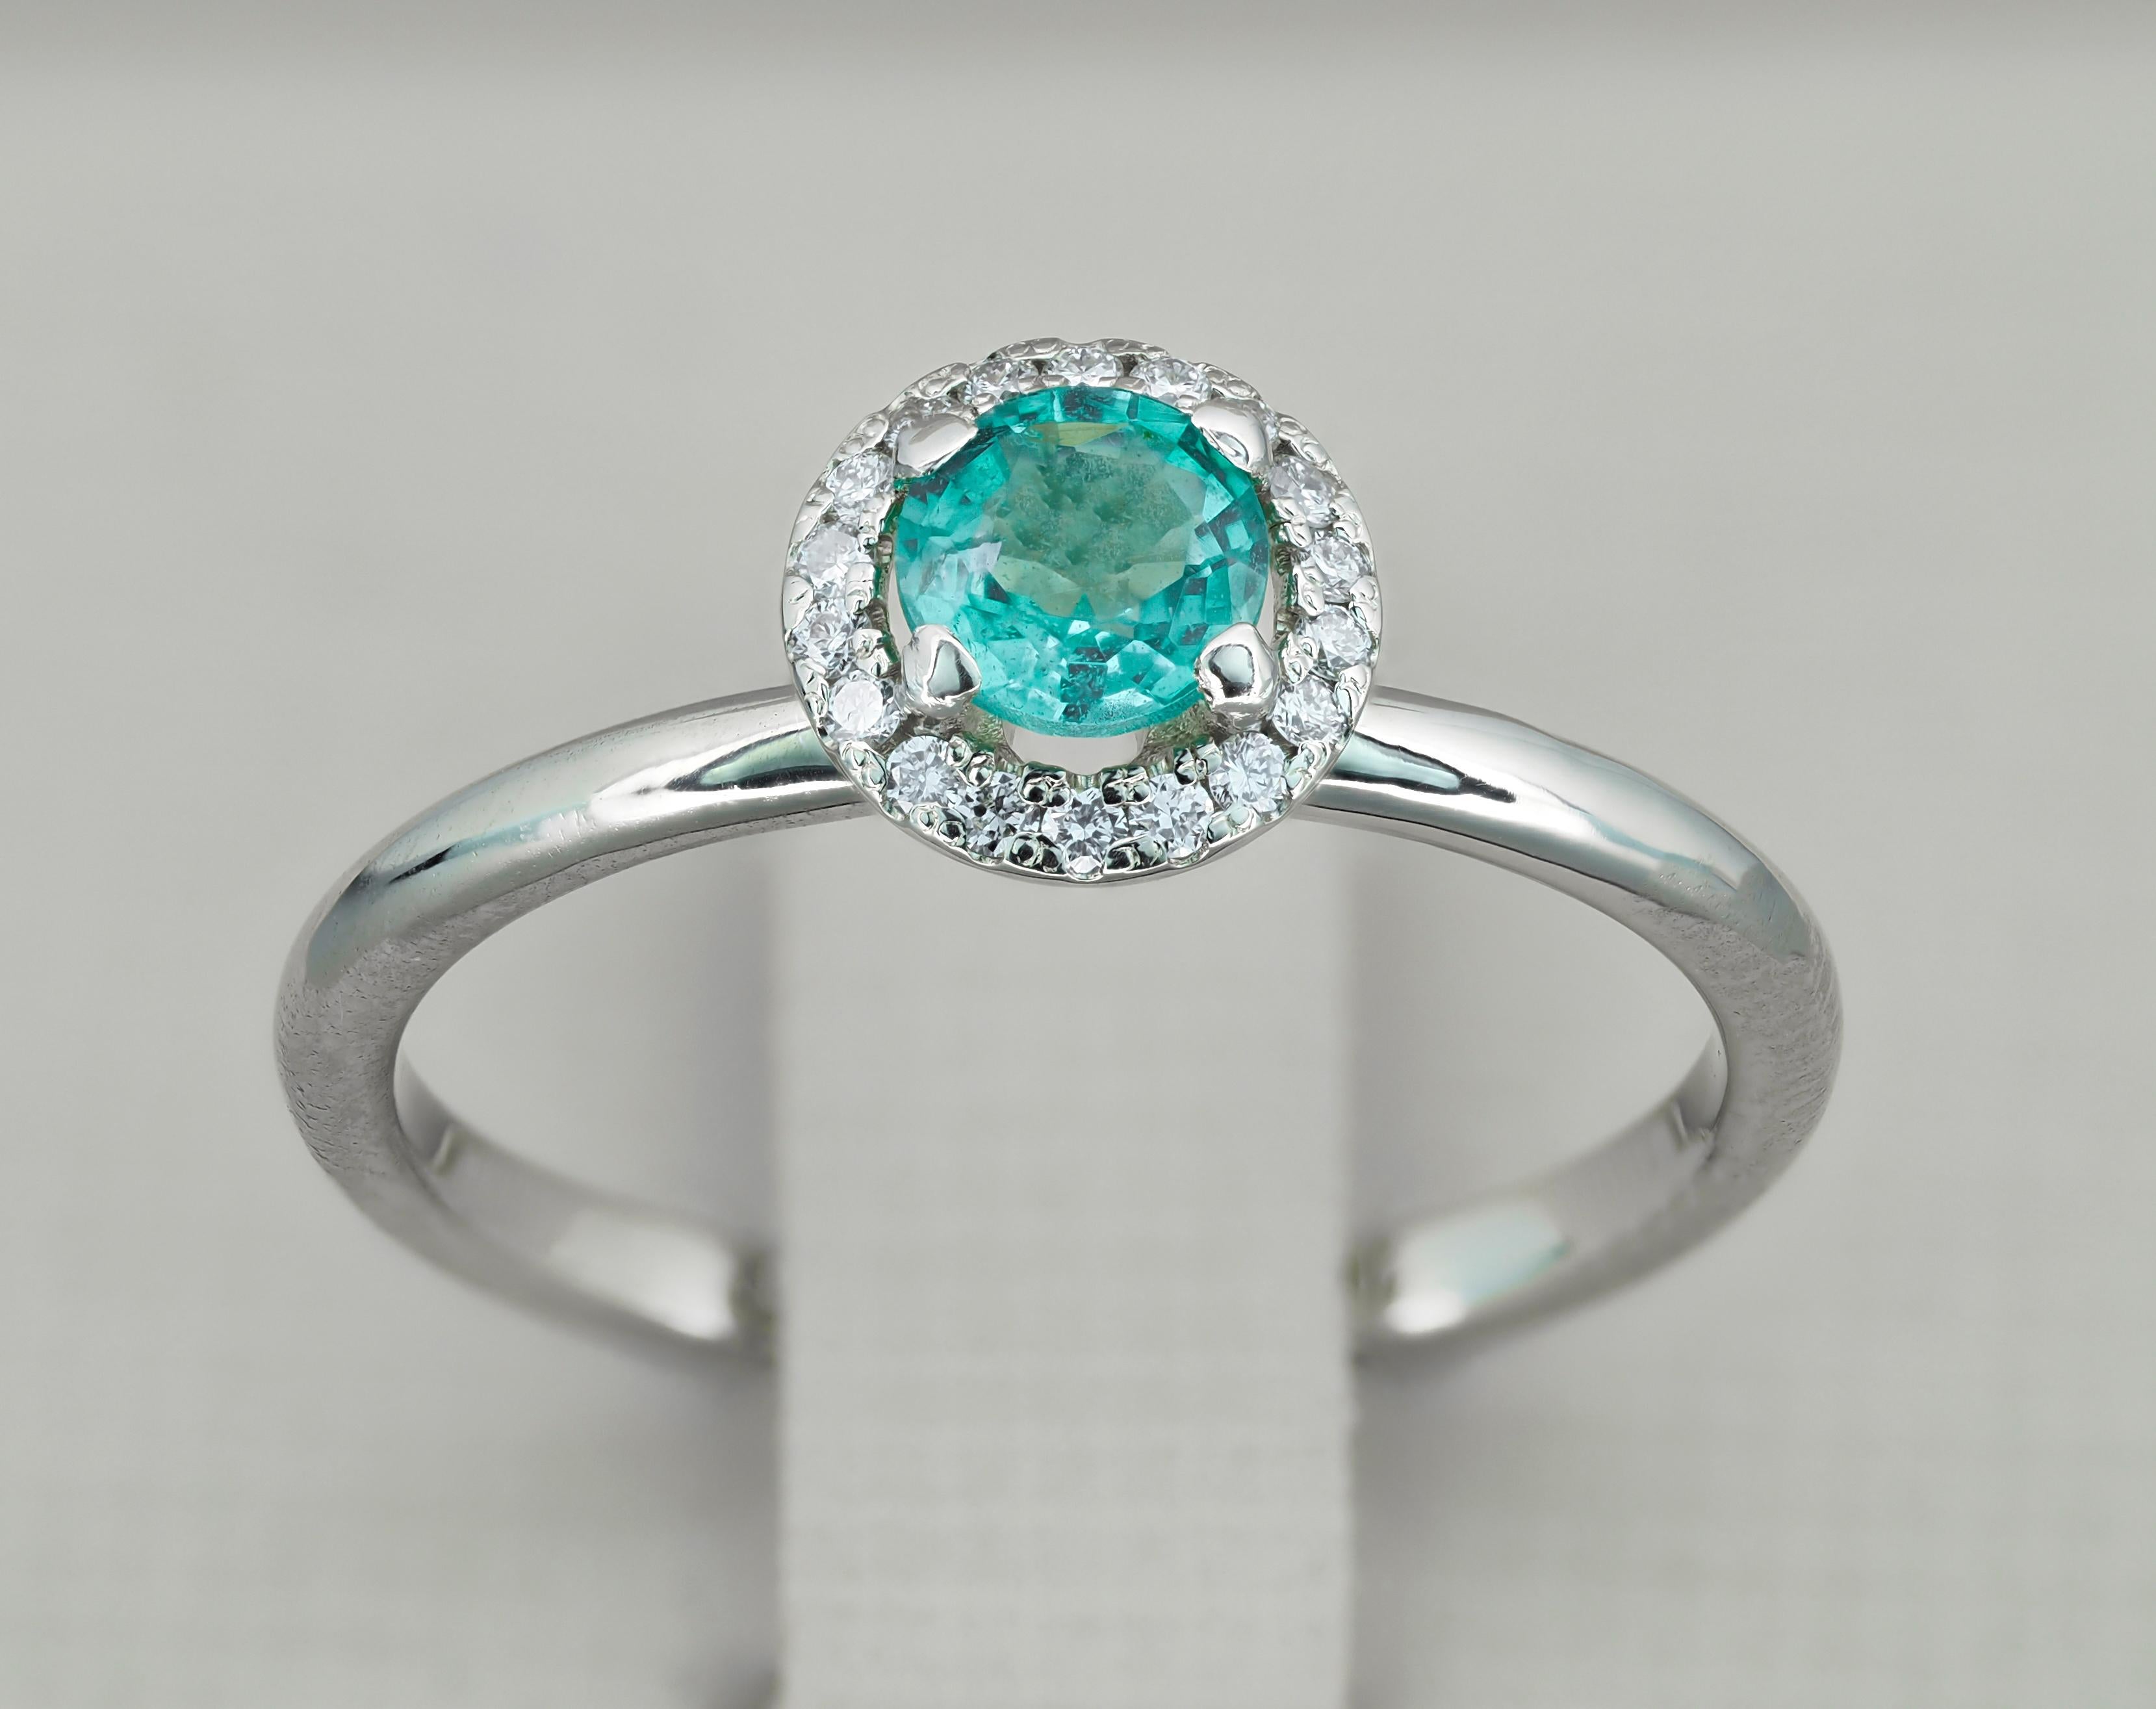 For Sale:  Emerald and Diamonds 14k gold ring.  Emerald Halo Gold Ring. 6